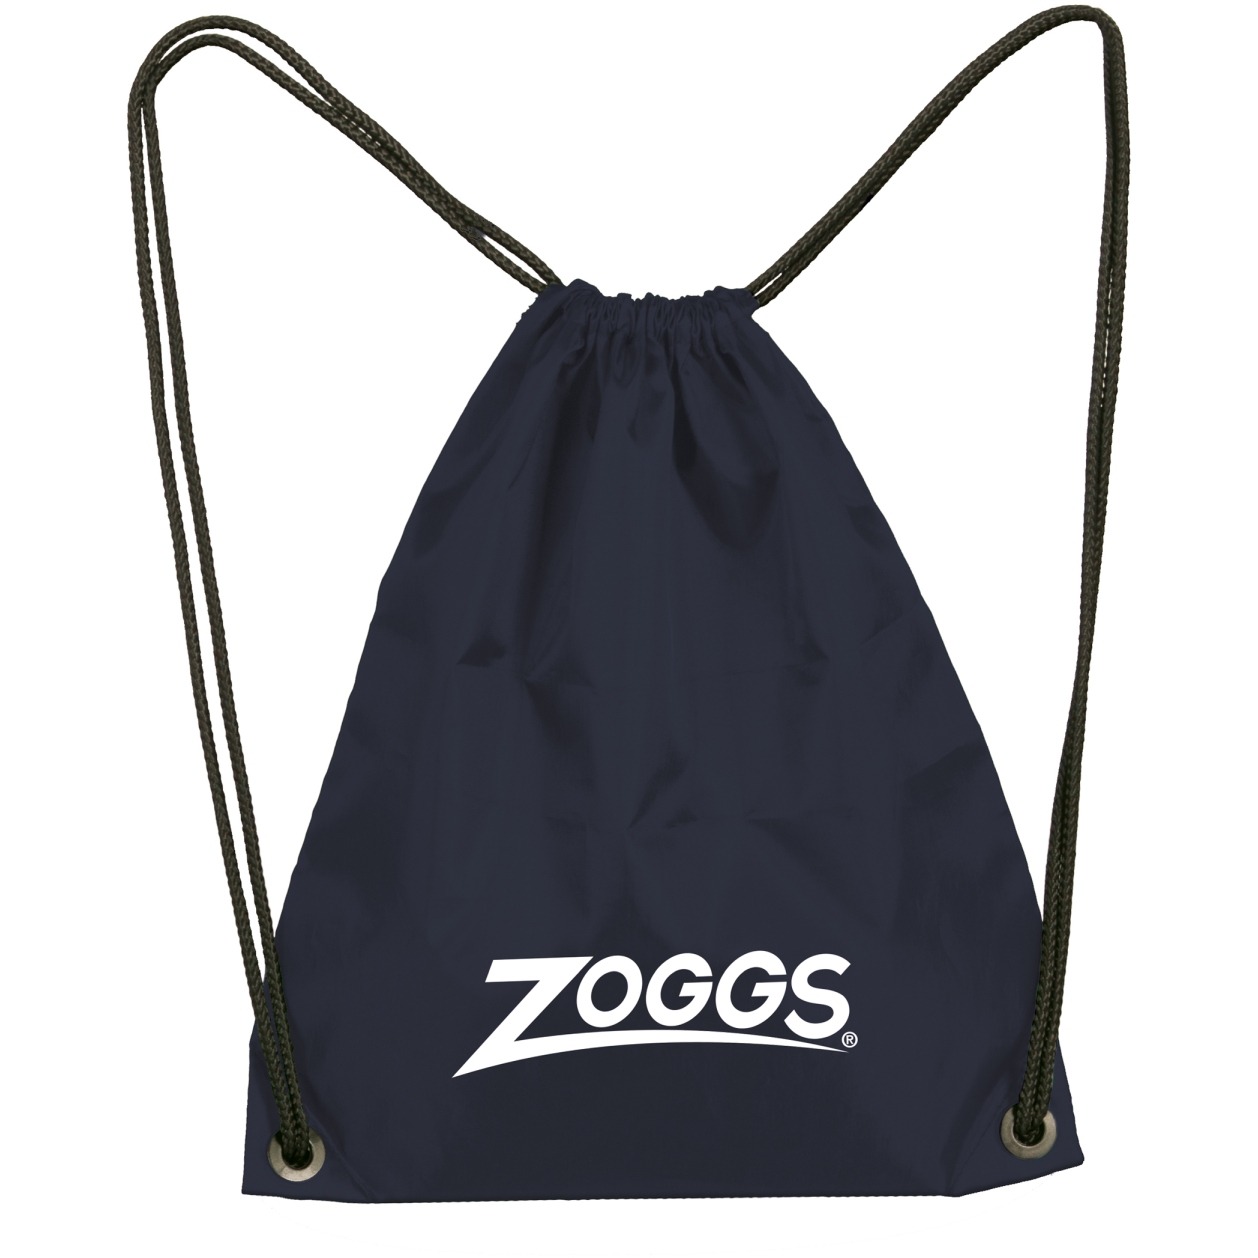 Picture of Zoggs Sling Bag - Black